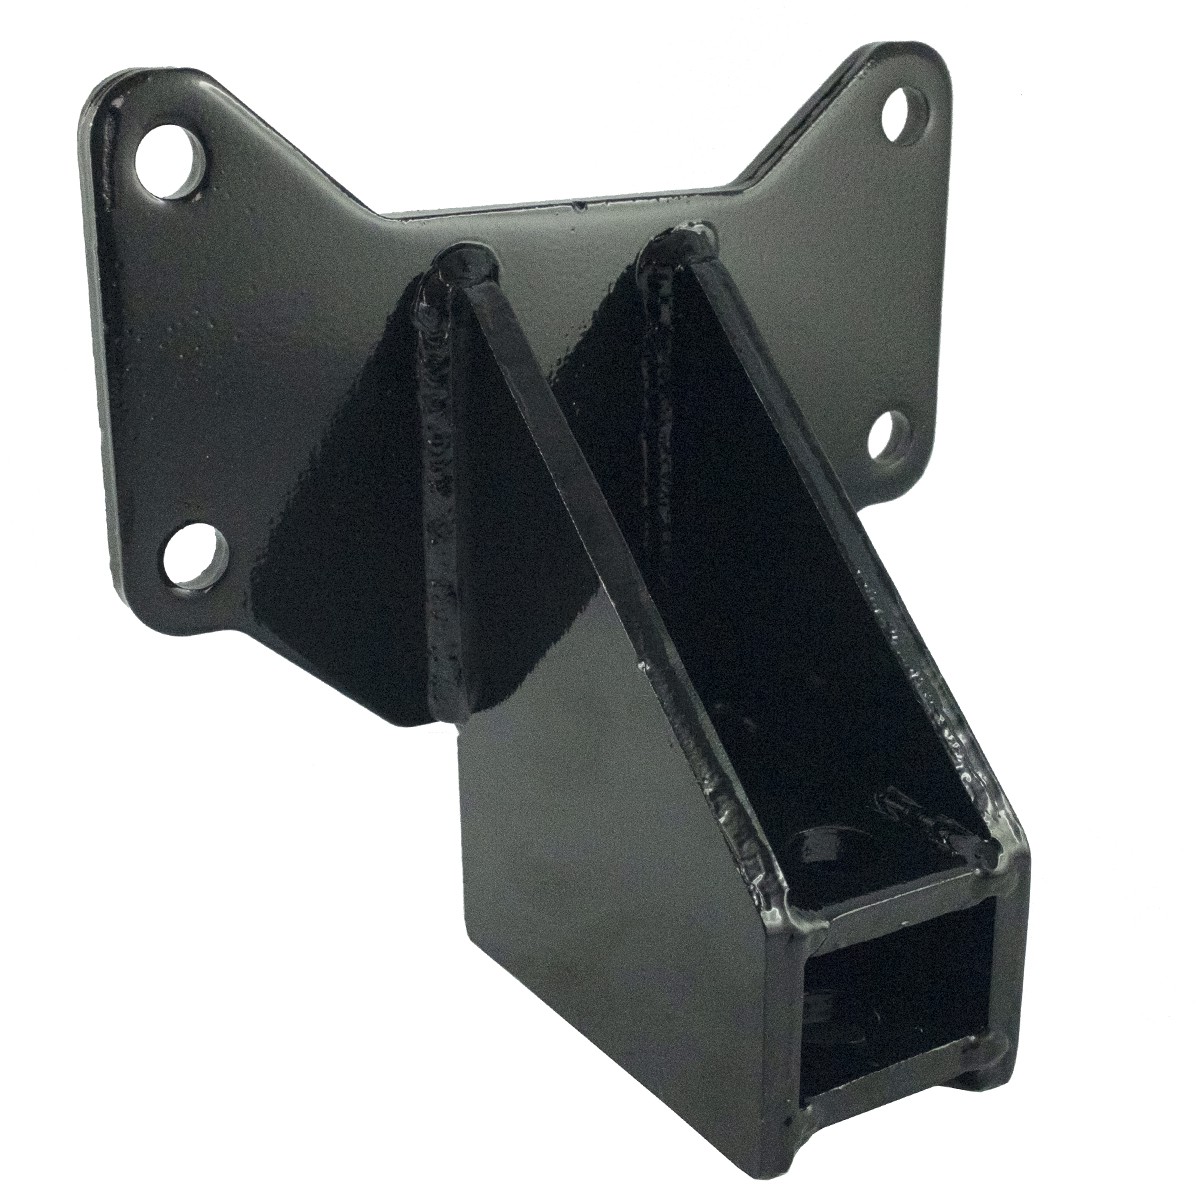 Support, fixation sur barre d'attelage / TRG891 / Ls Tractor 40011134